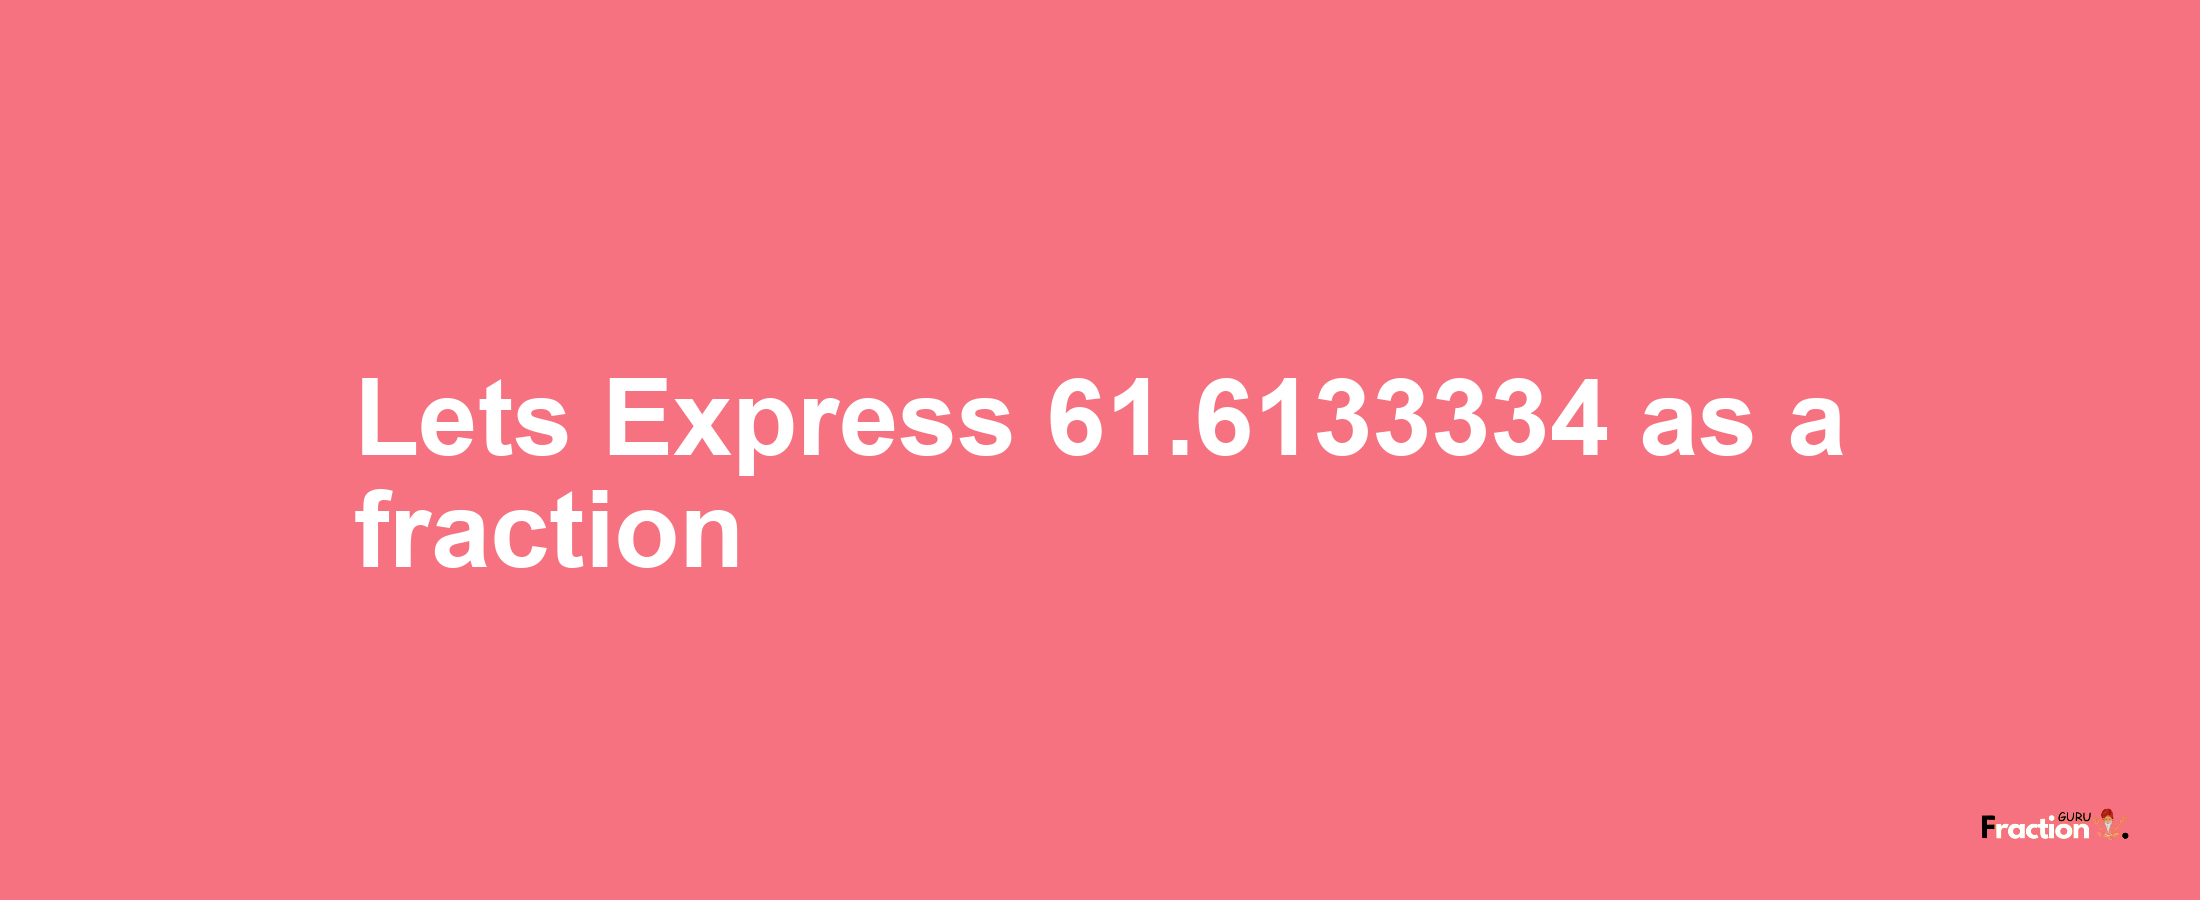 Lets Express 61.6133334 as afraction